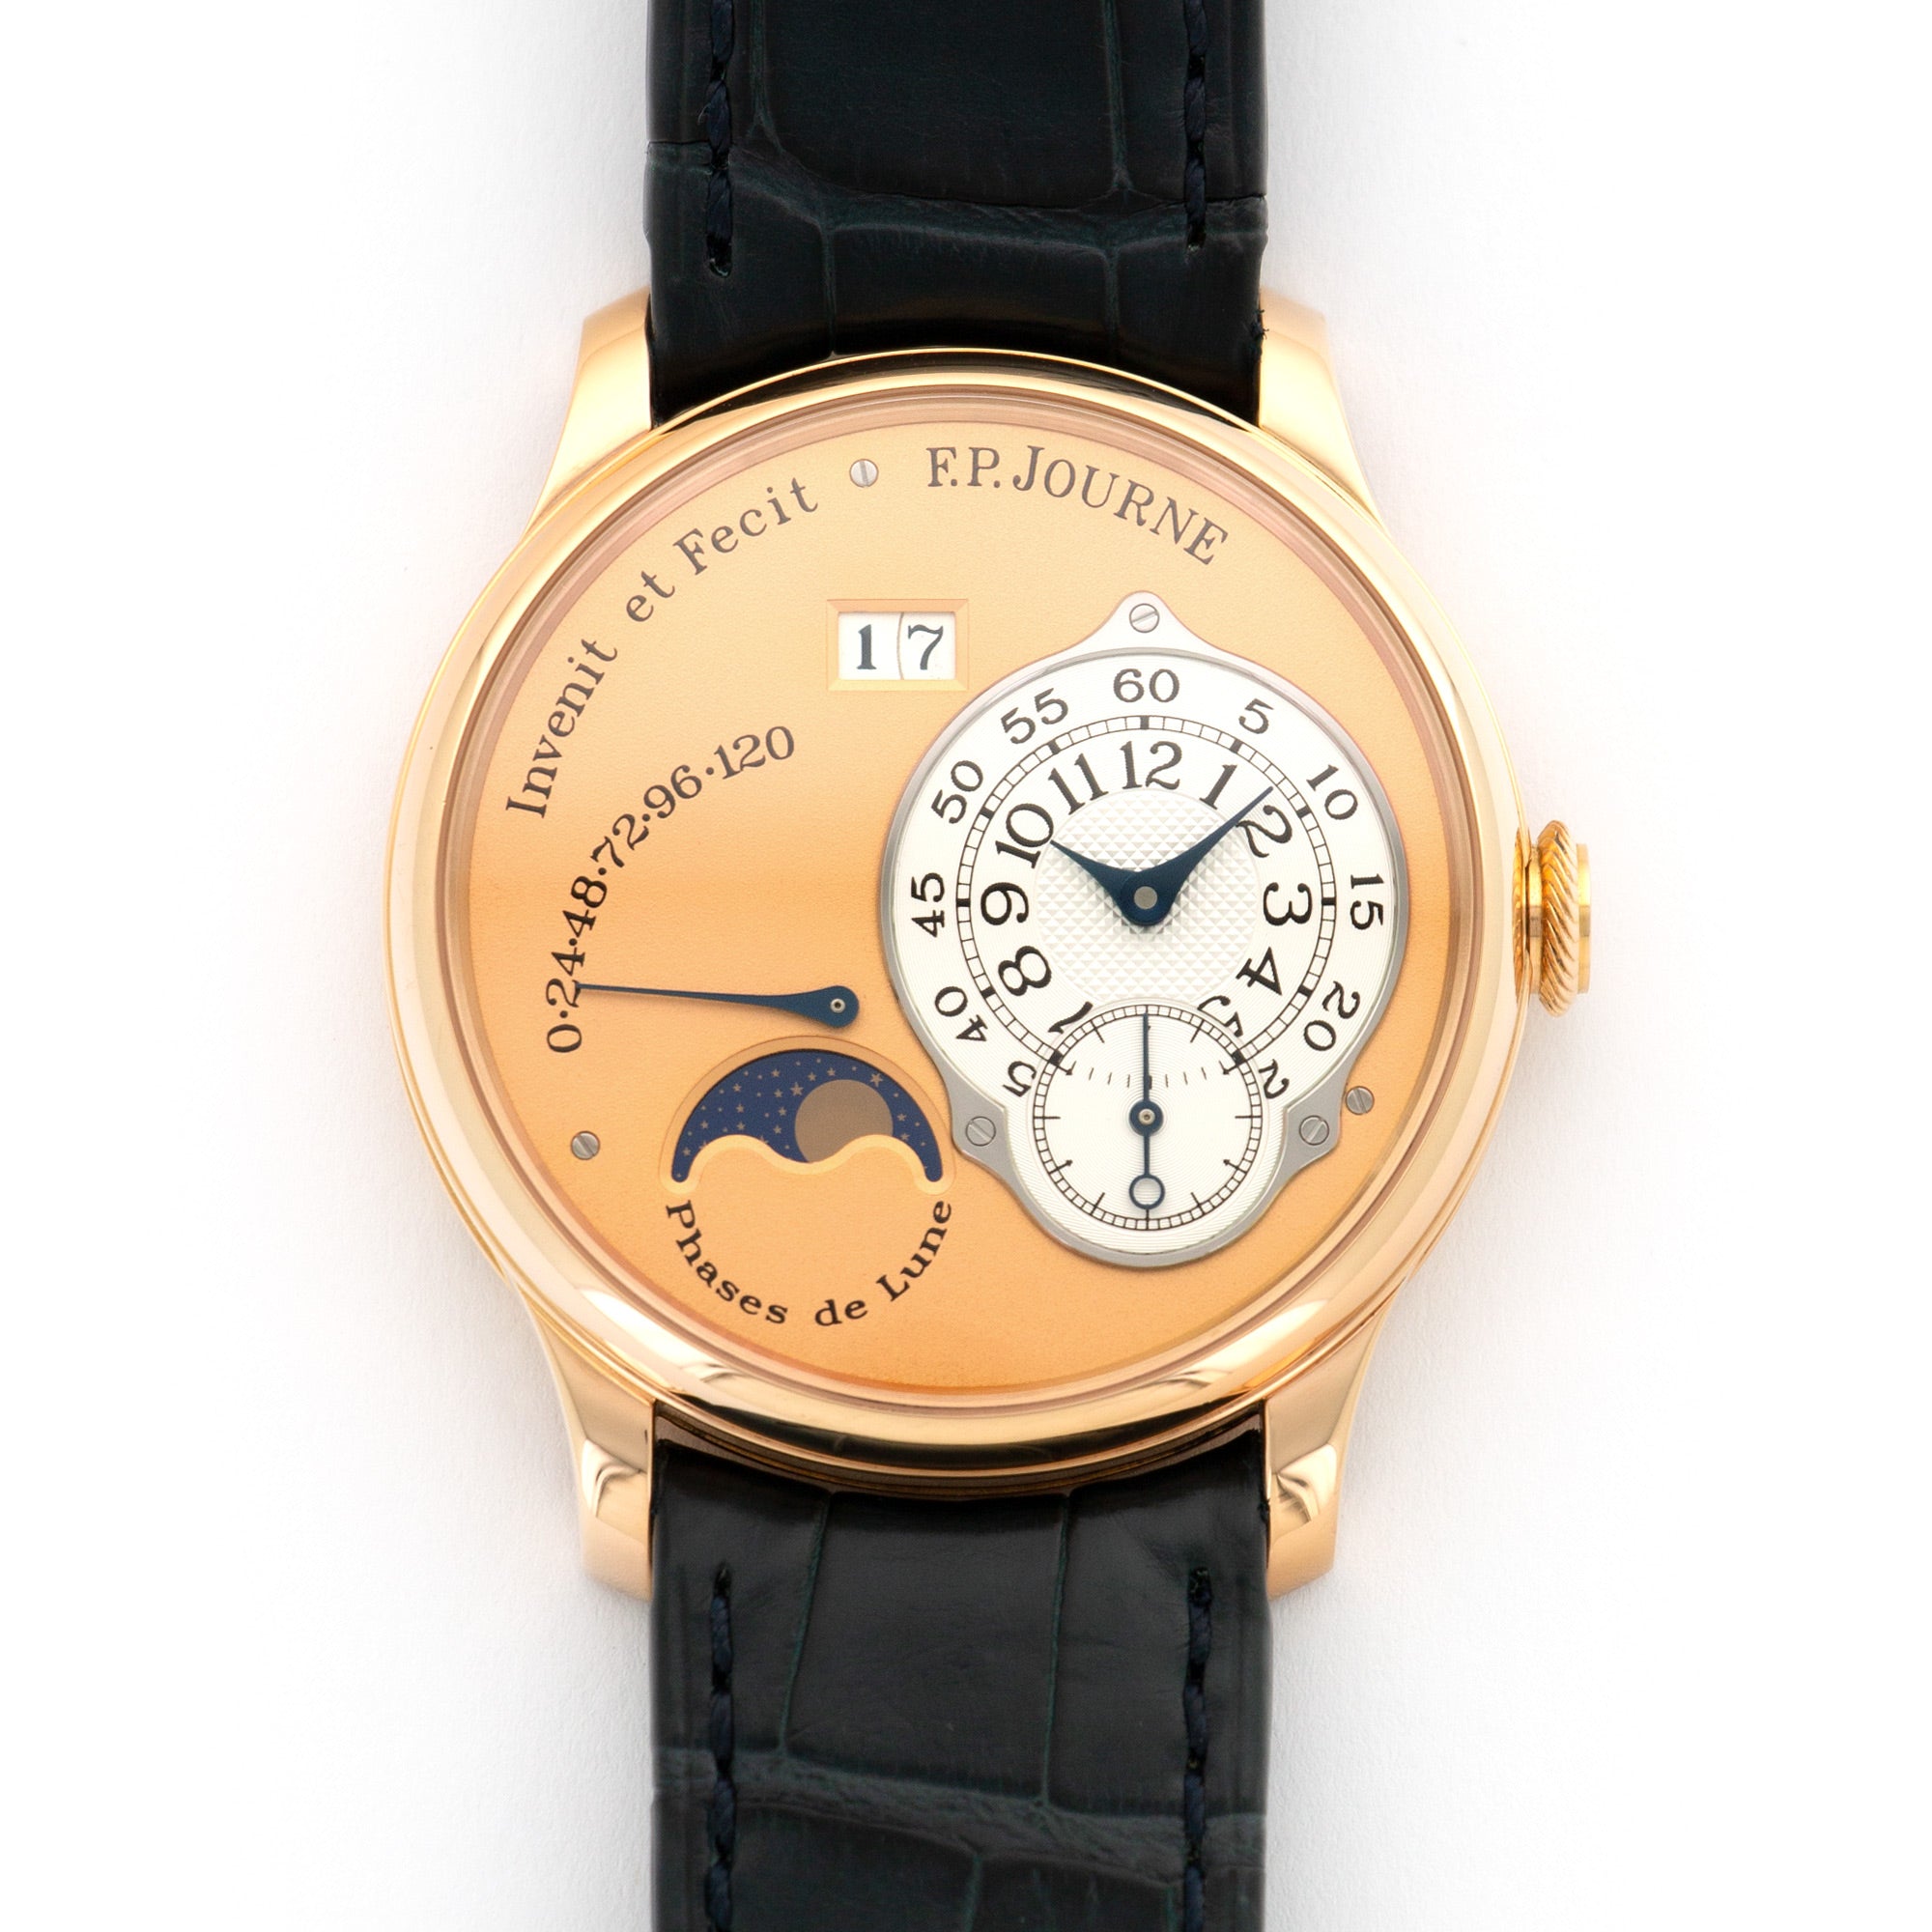 FP Journe - F.P. Journe Rose Gold Octa Lune Watch, with Original Box and Certificate - The Keystone Watches